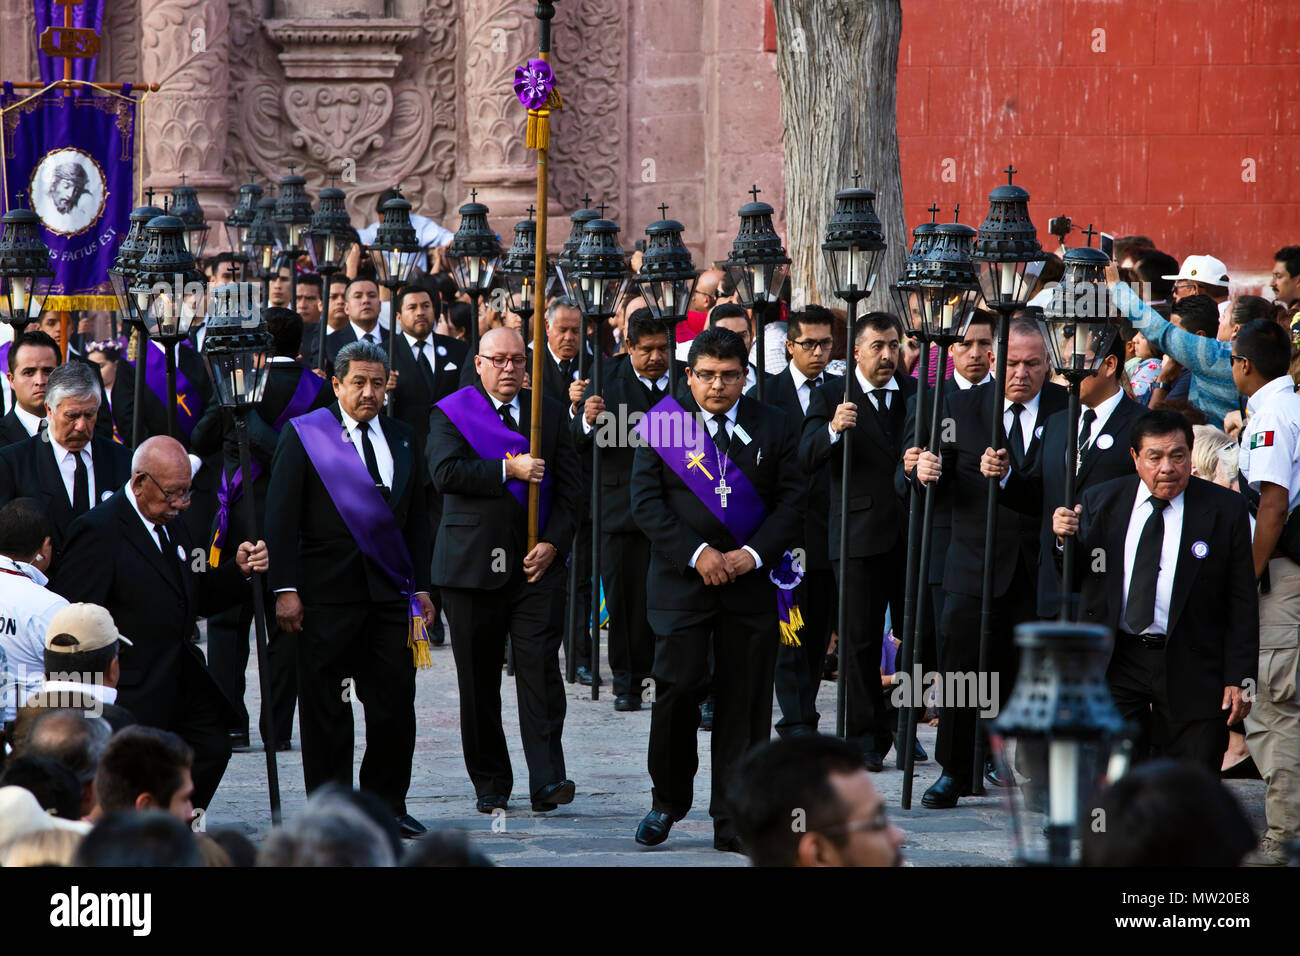 Mexican men carry candle lanterns in the Good Friday Procession, known as the Santo Entierro, from the ORATORIO CHURCH - SAN MIGUEL DE ALLENDE, MEXICO Stock Photo